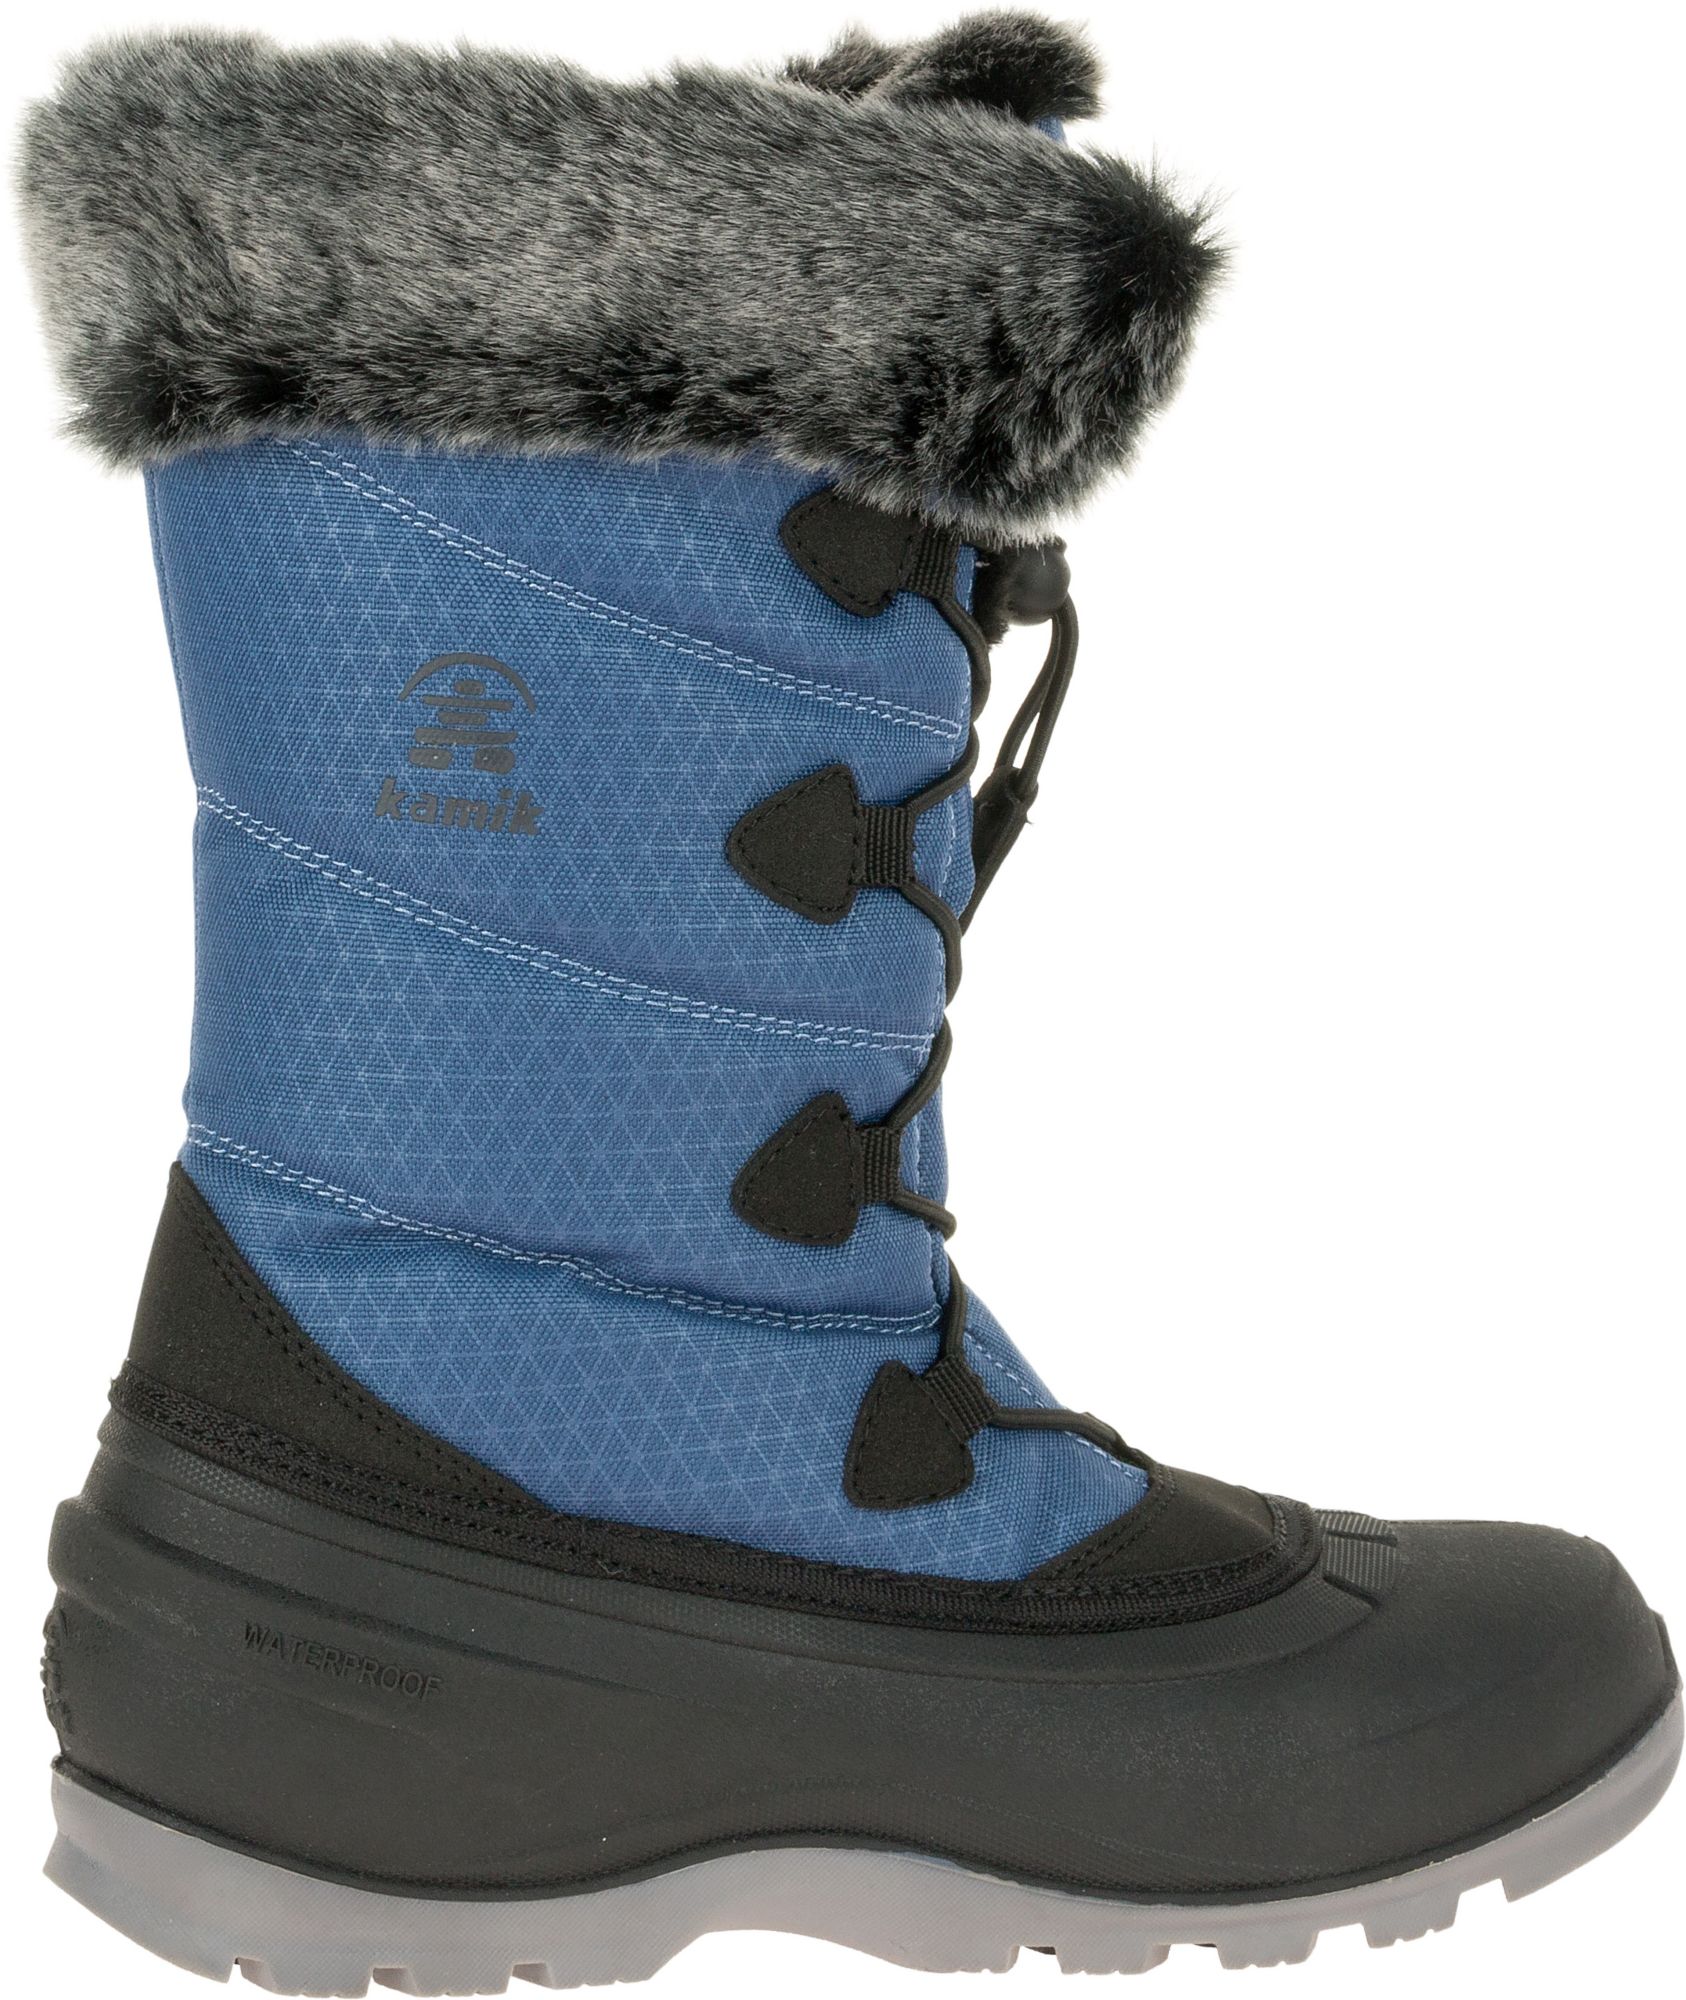 waterproof cold weather boots